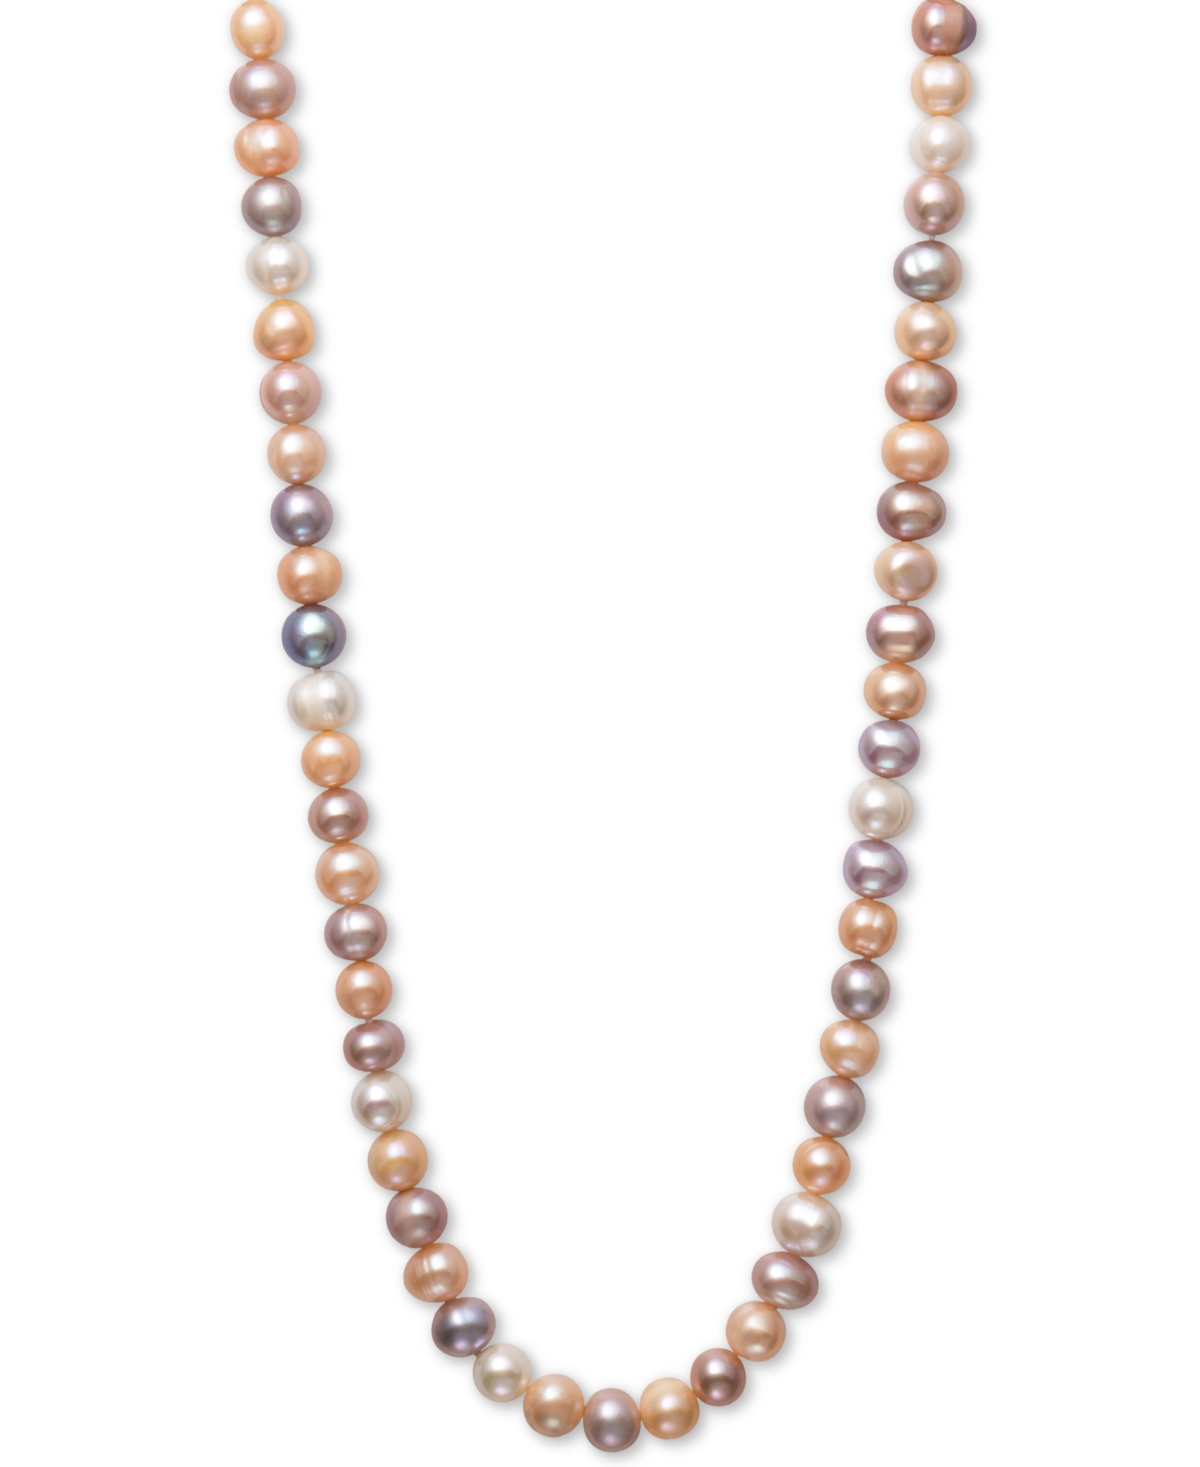 Belle de Mer Pearl Necklace, 36" Cultured Freshwater Pearl Endless Strand (8-1/2mm)